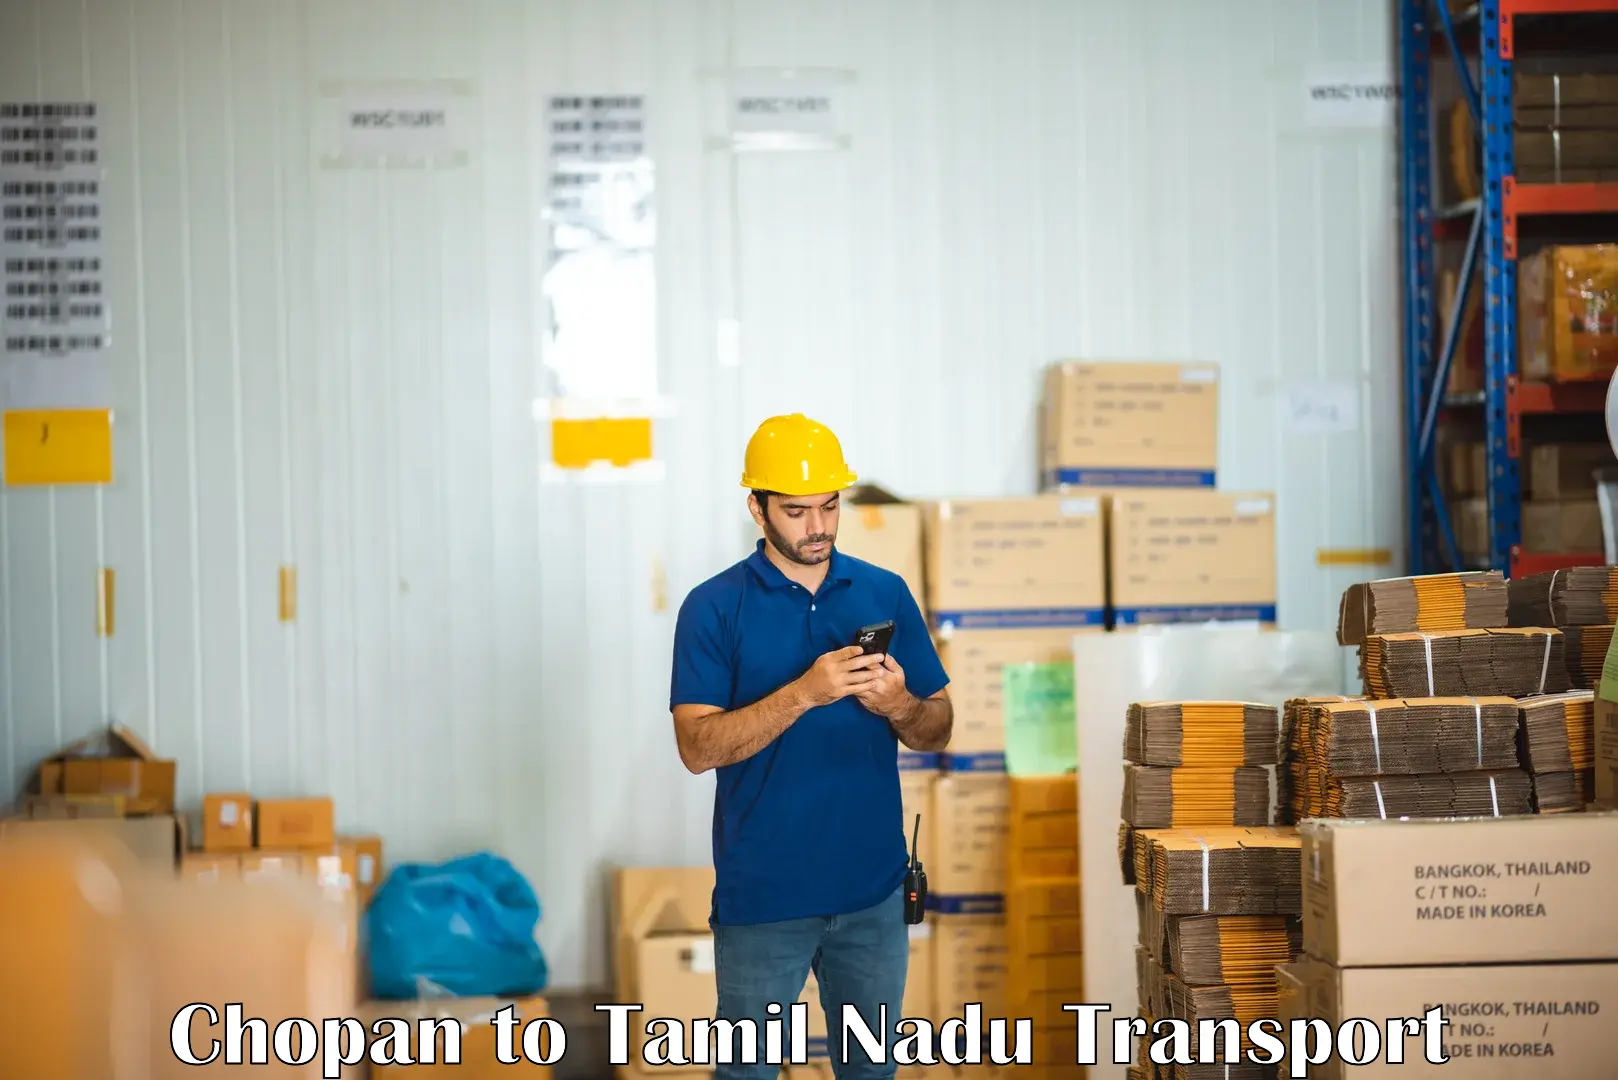 Transport shared services Chopan to Tamil Nadu